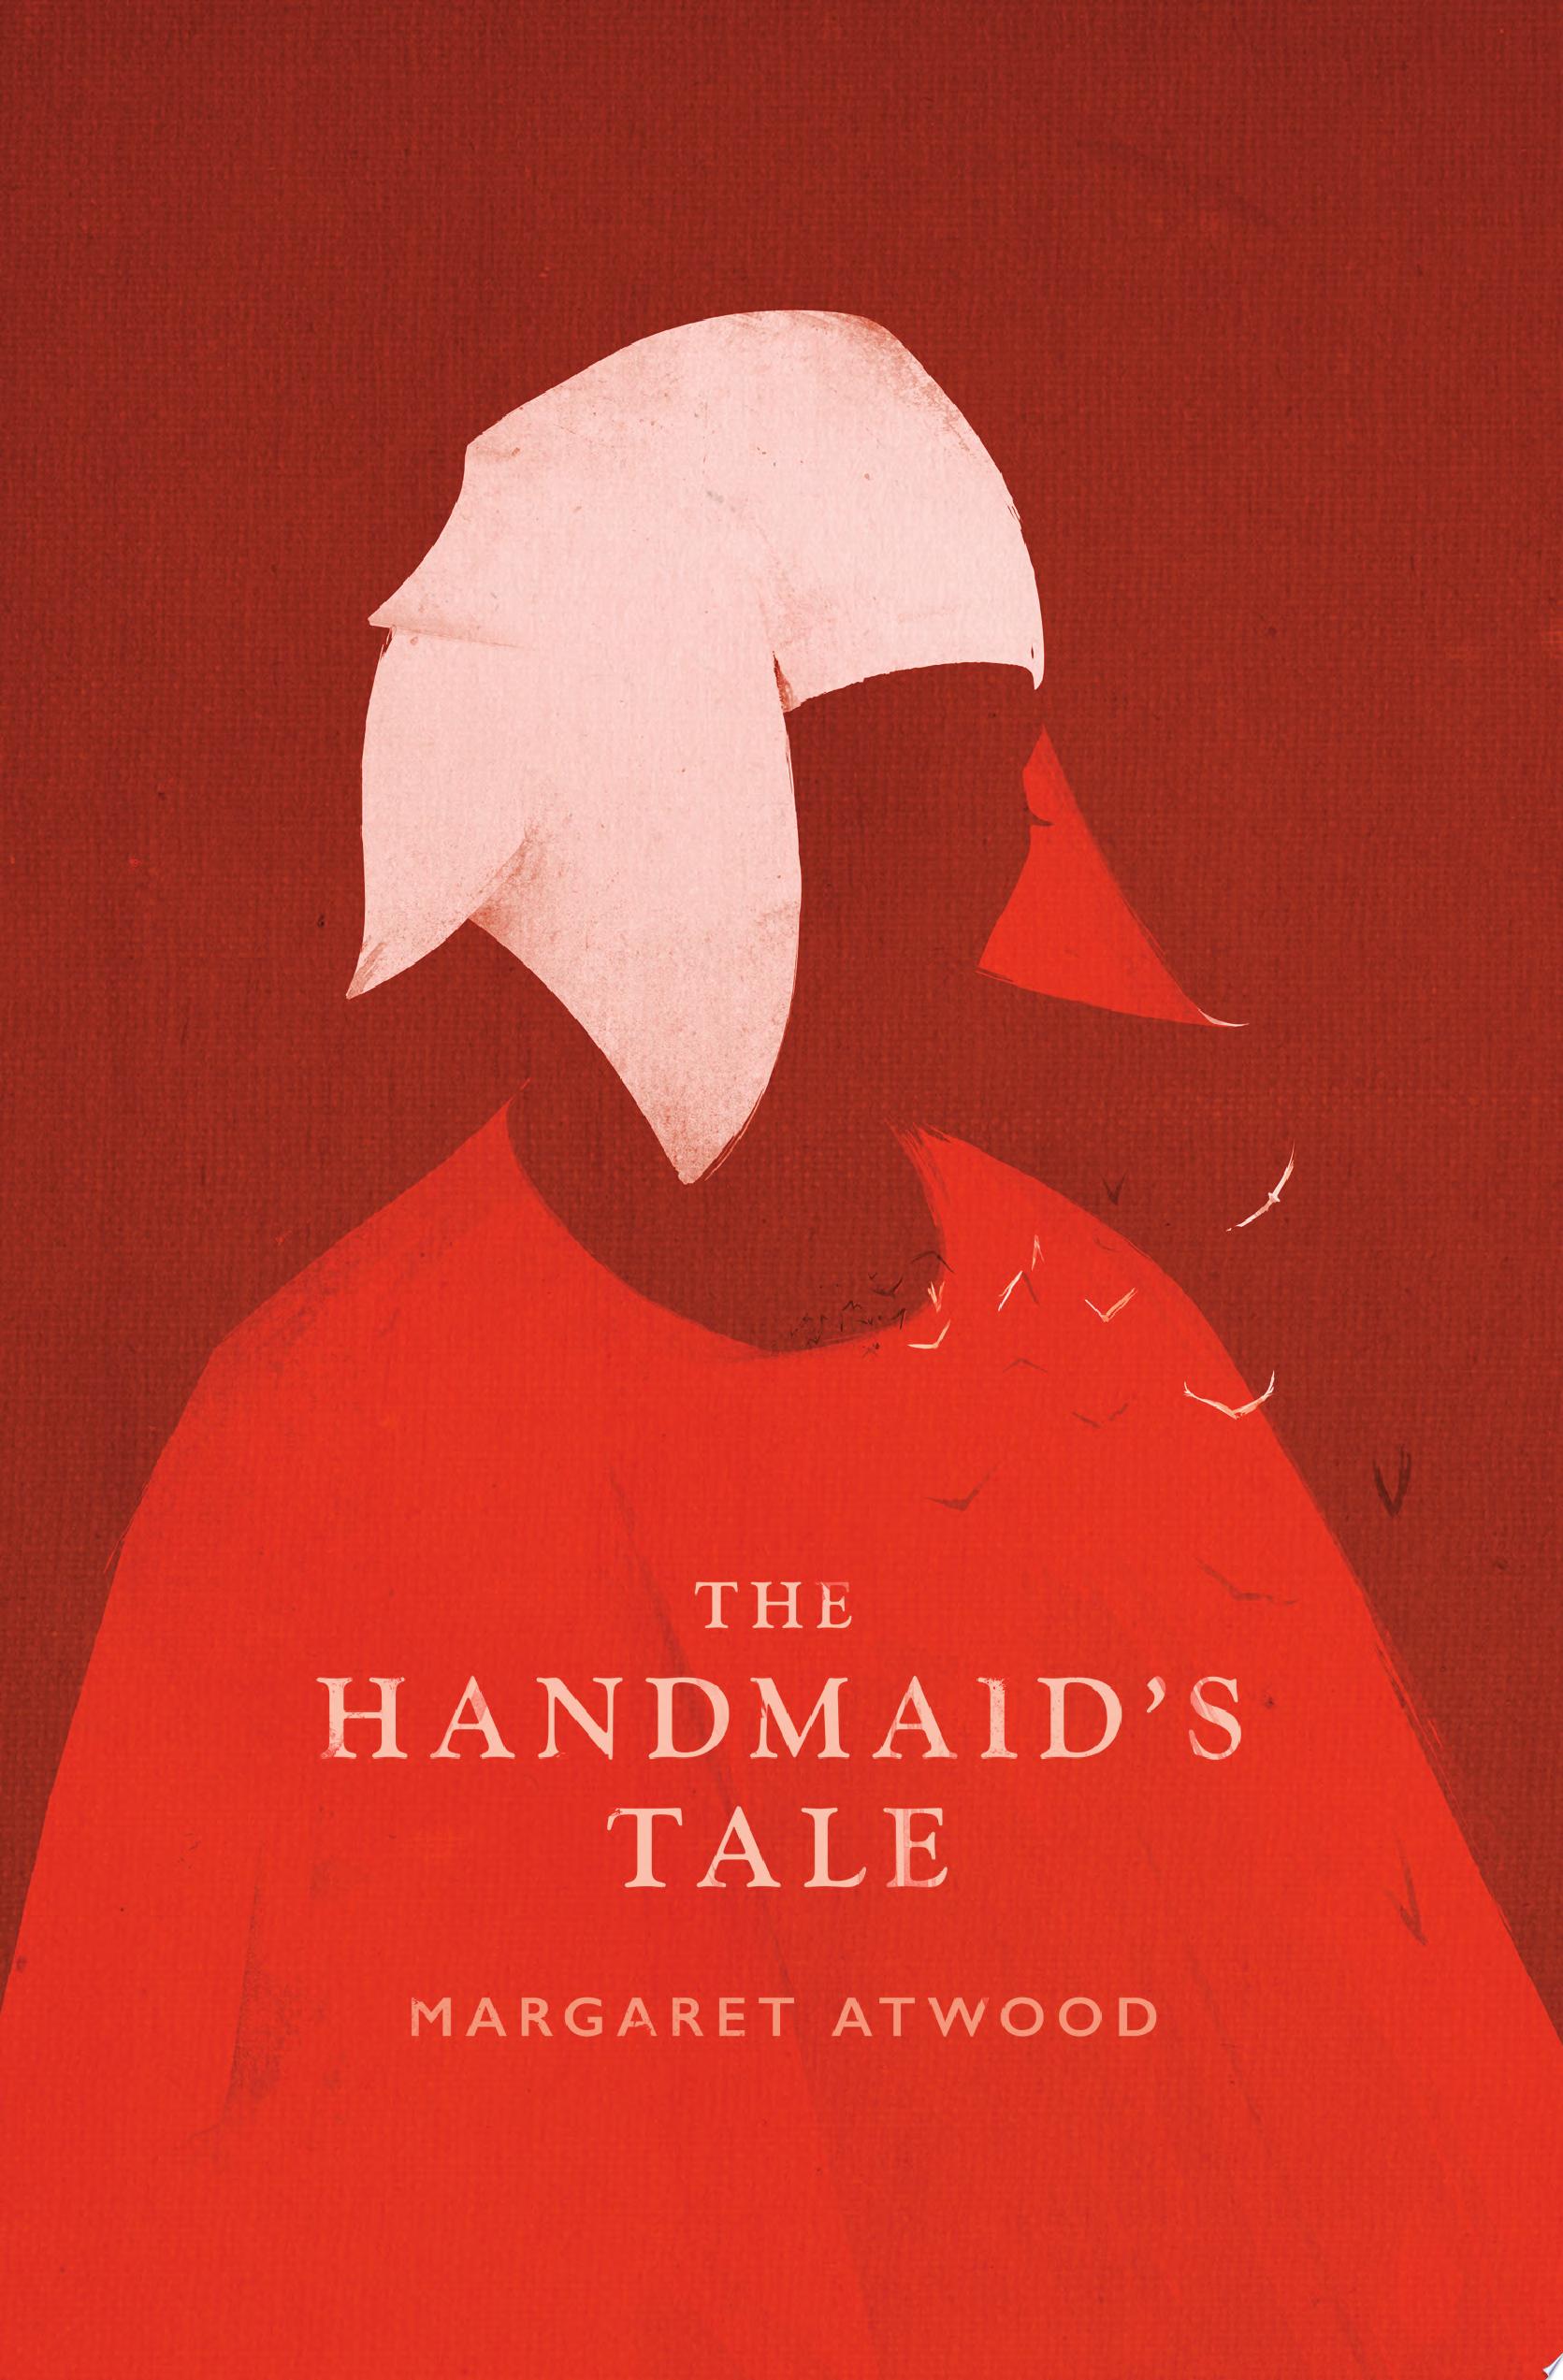 Image for "The Handmaid's Tale"